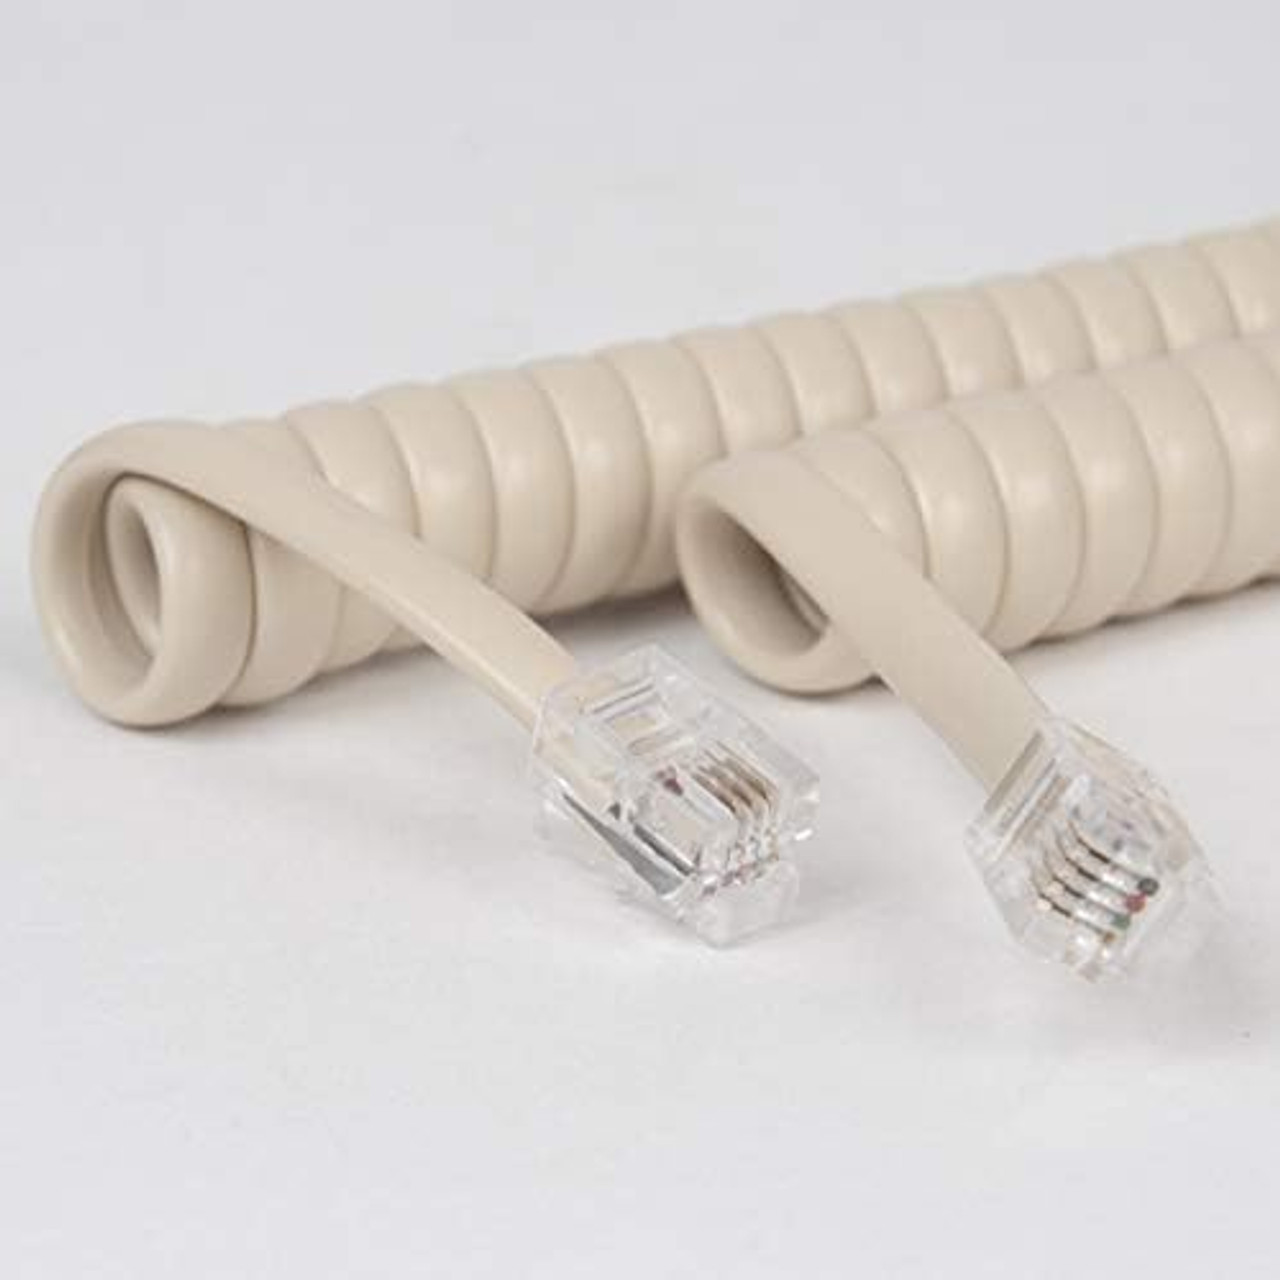 Cablesys Coiled Telephone Handset Cord for Use with PBX Phone Systems, VoIP Telephones - 6 Ft Uncoiled, Rj22, 1.5 Inch Lead on Both Ends, Ivory